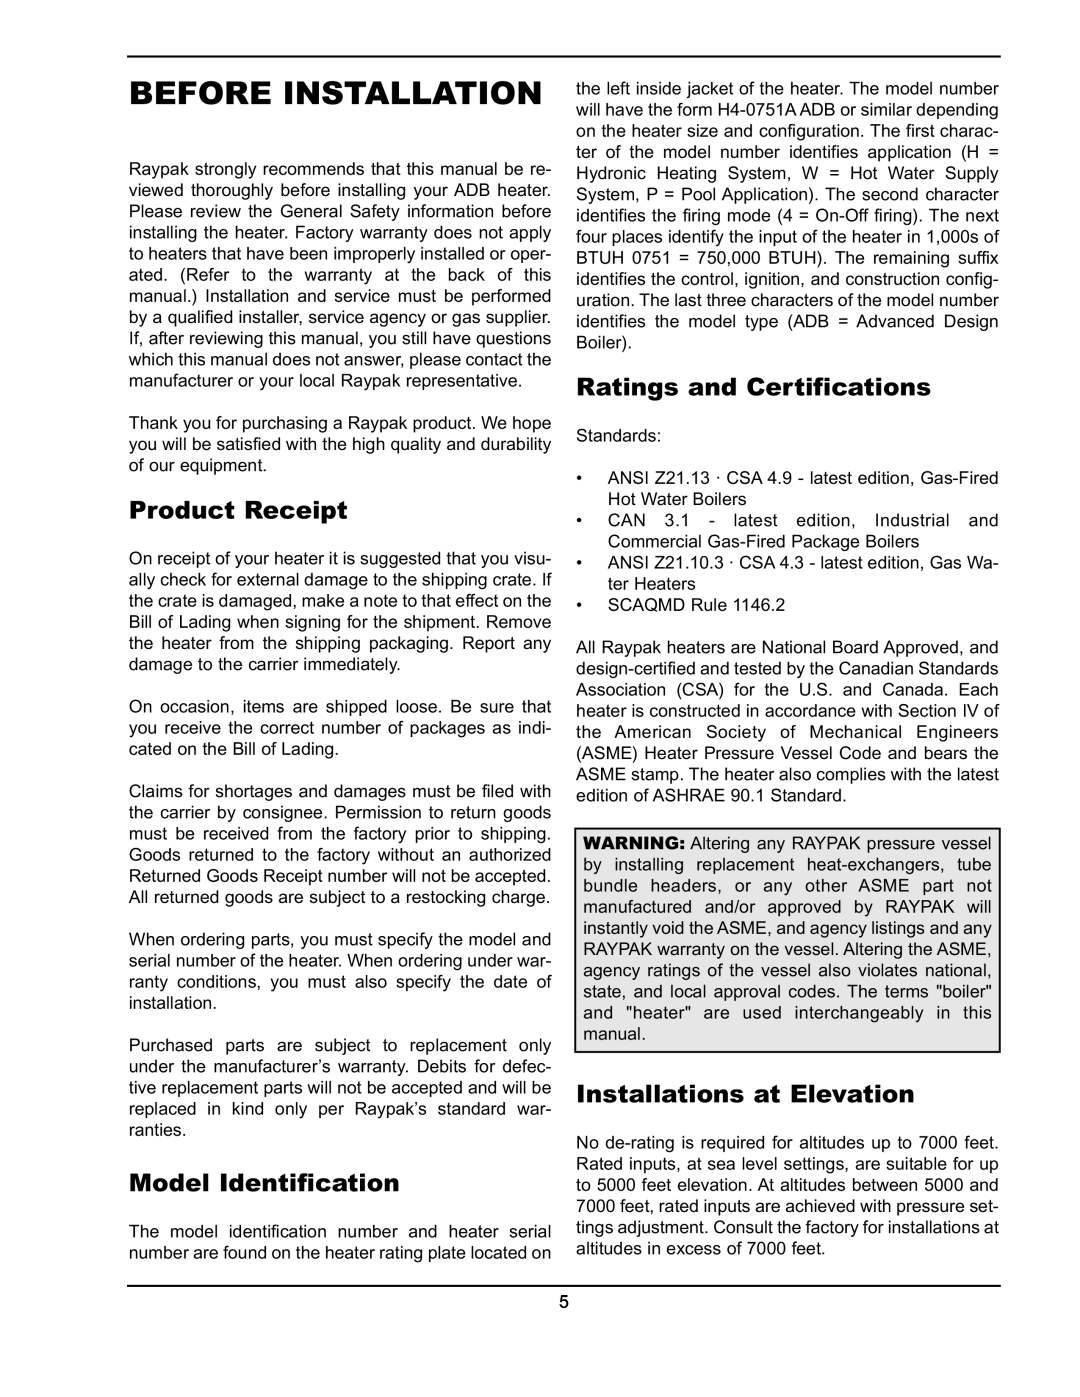 Raypak 751 manual Before Installation, Product Receipt, Model Identification, Ratings and Certifications 